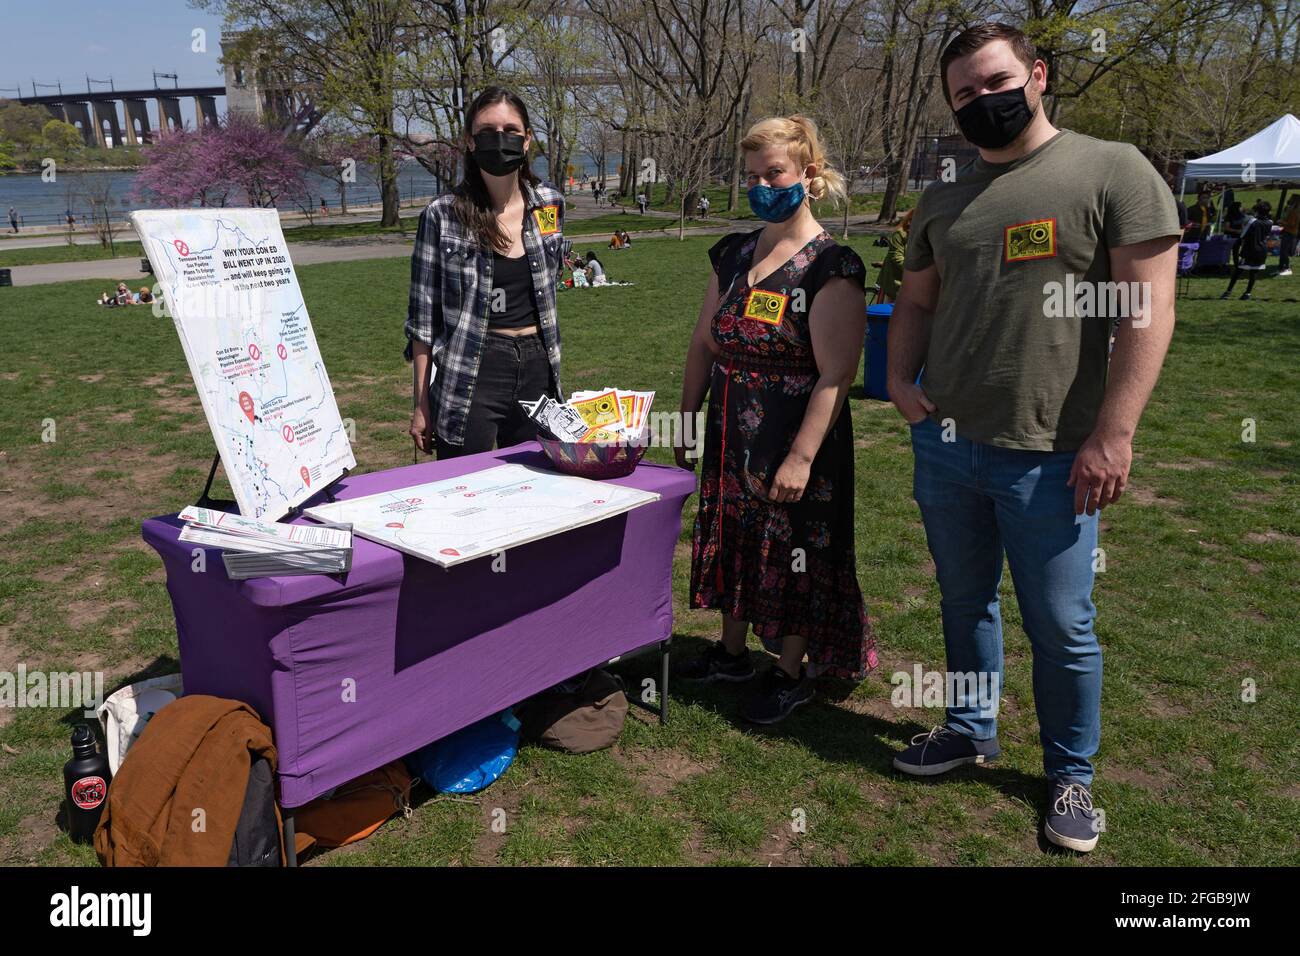 Activists stand by the Sane Energy Project table during Earth Day Celebration in Astoria Park of the Queens borough of New York City.Congresswoman Ocasio-Cortez joined by New York State Senator Jessica Ramos and New York Assembly Member Zohran Mamdani for remarks about the NRG Energy, Inc proposal for the Astoria power plant. The Congresswoman opposes NRG's effort to replace their 50-year old turbine at the Astoria 'peaker' plant with a generator that burns fossil fuels extracted by fracking. (Photo by Ron Adar/SOPA Images/Sipa USA) Stock Photo